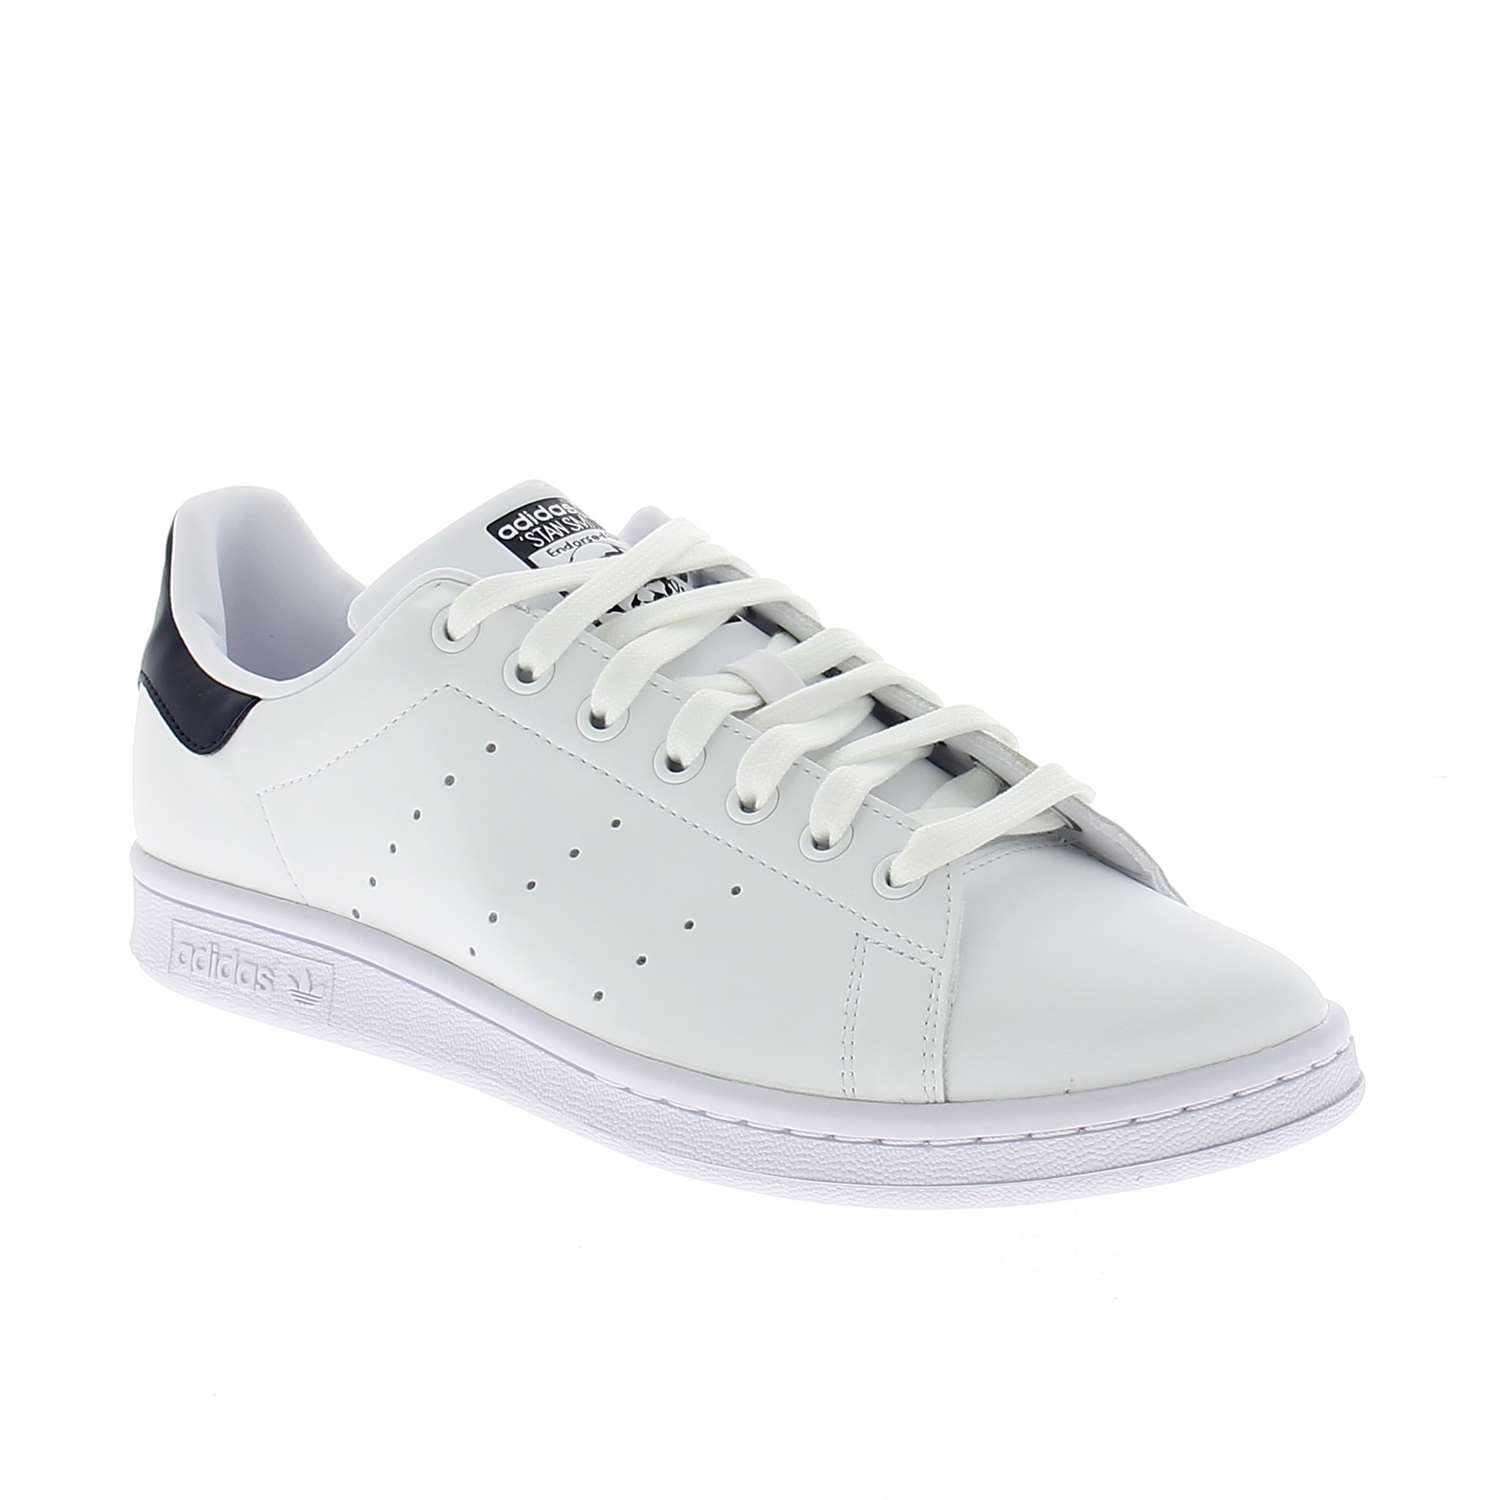 01 - STAN SMITH - ADIDAS - Baskets - Synthétique